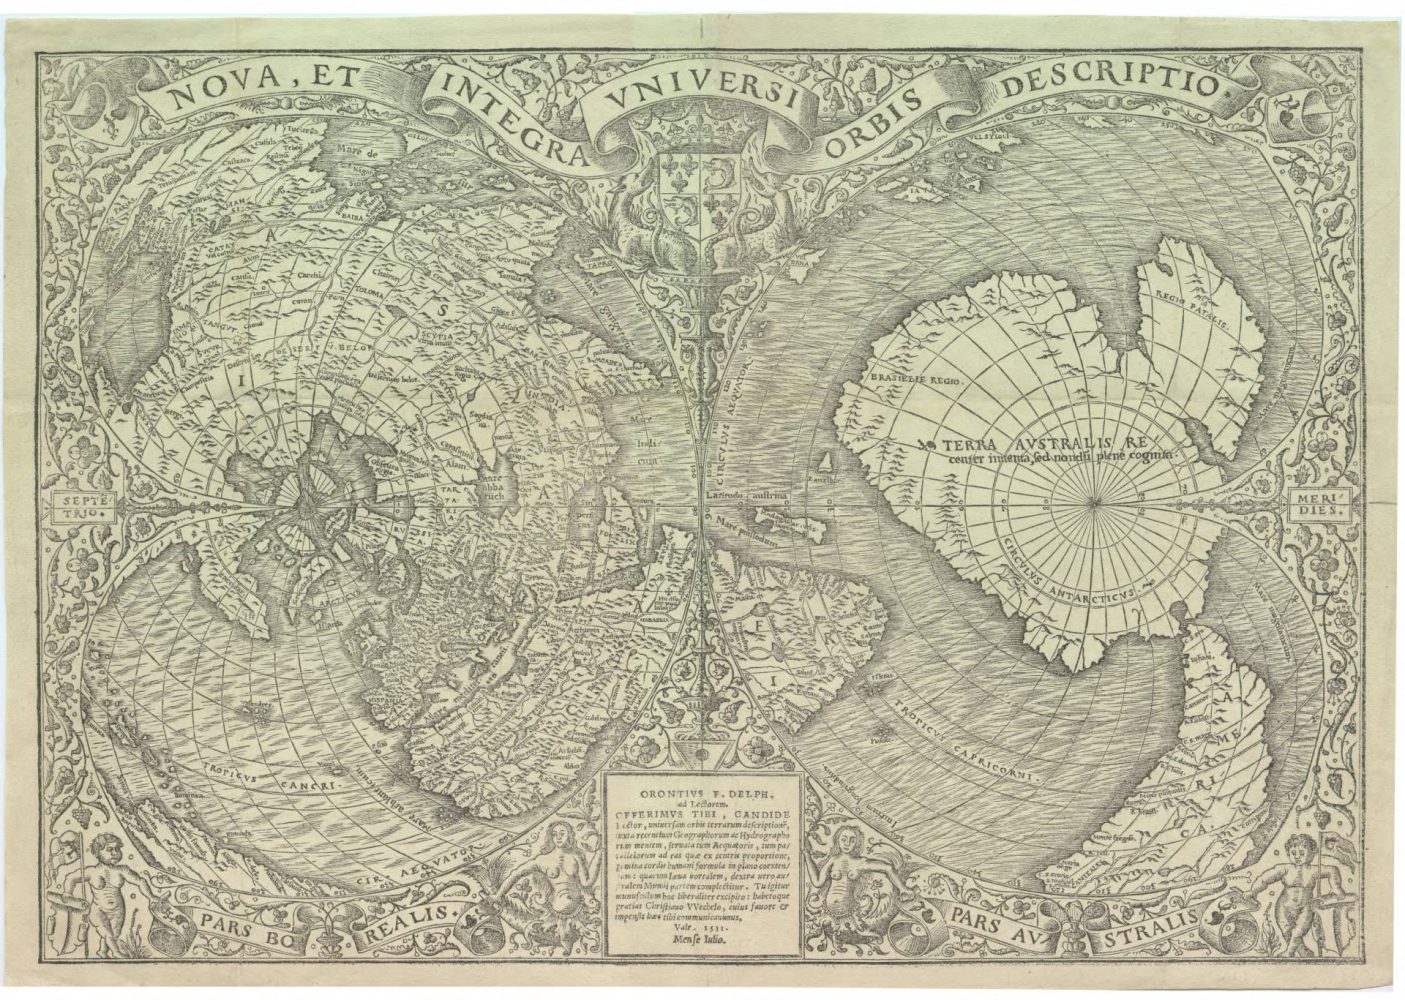 Cordiform or heart-shaped, double hemisphere map, split at the equator with North to the left and South to the right of the image.